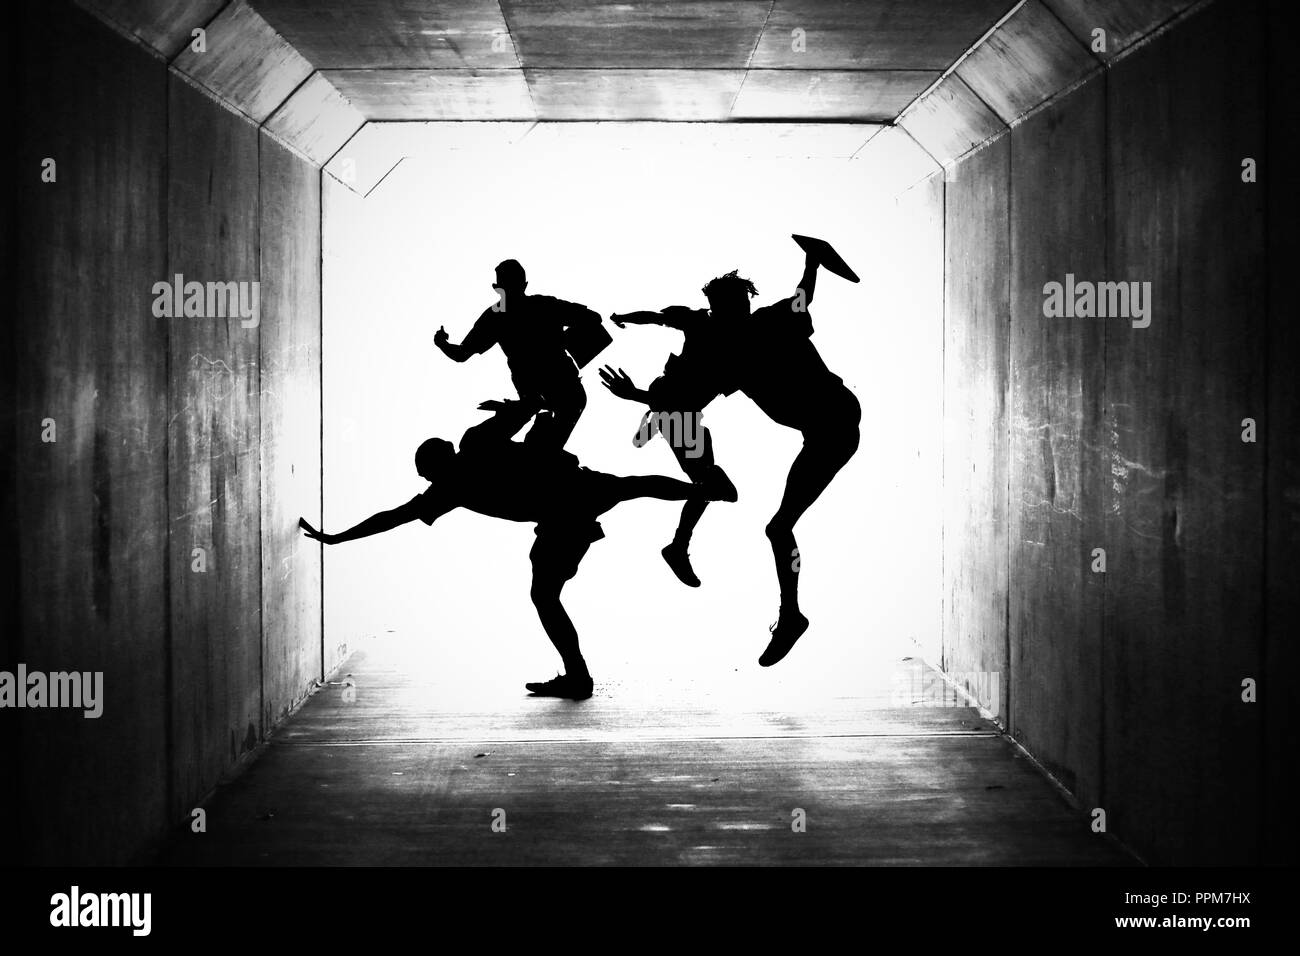 creative concept for graduation, leaving school, finished schooling or holidays. group of silhouetted boys jumping in the air in a tunnel. friends Stock Photo